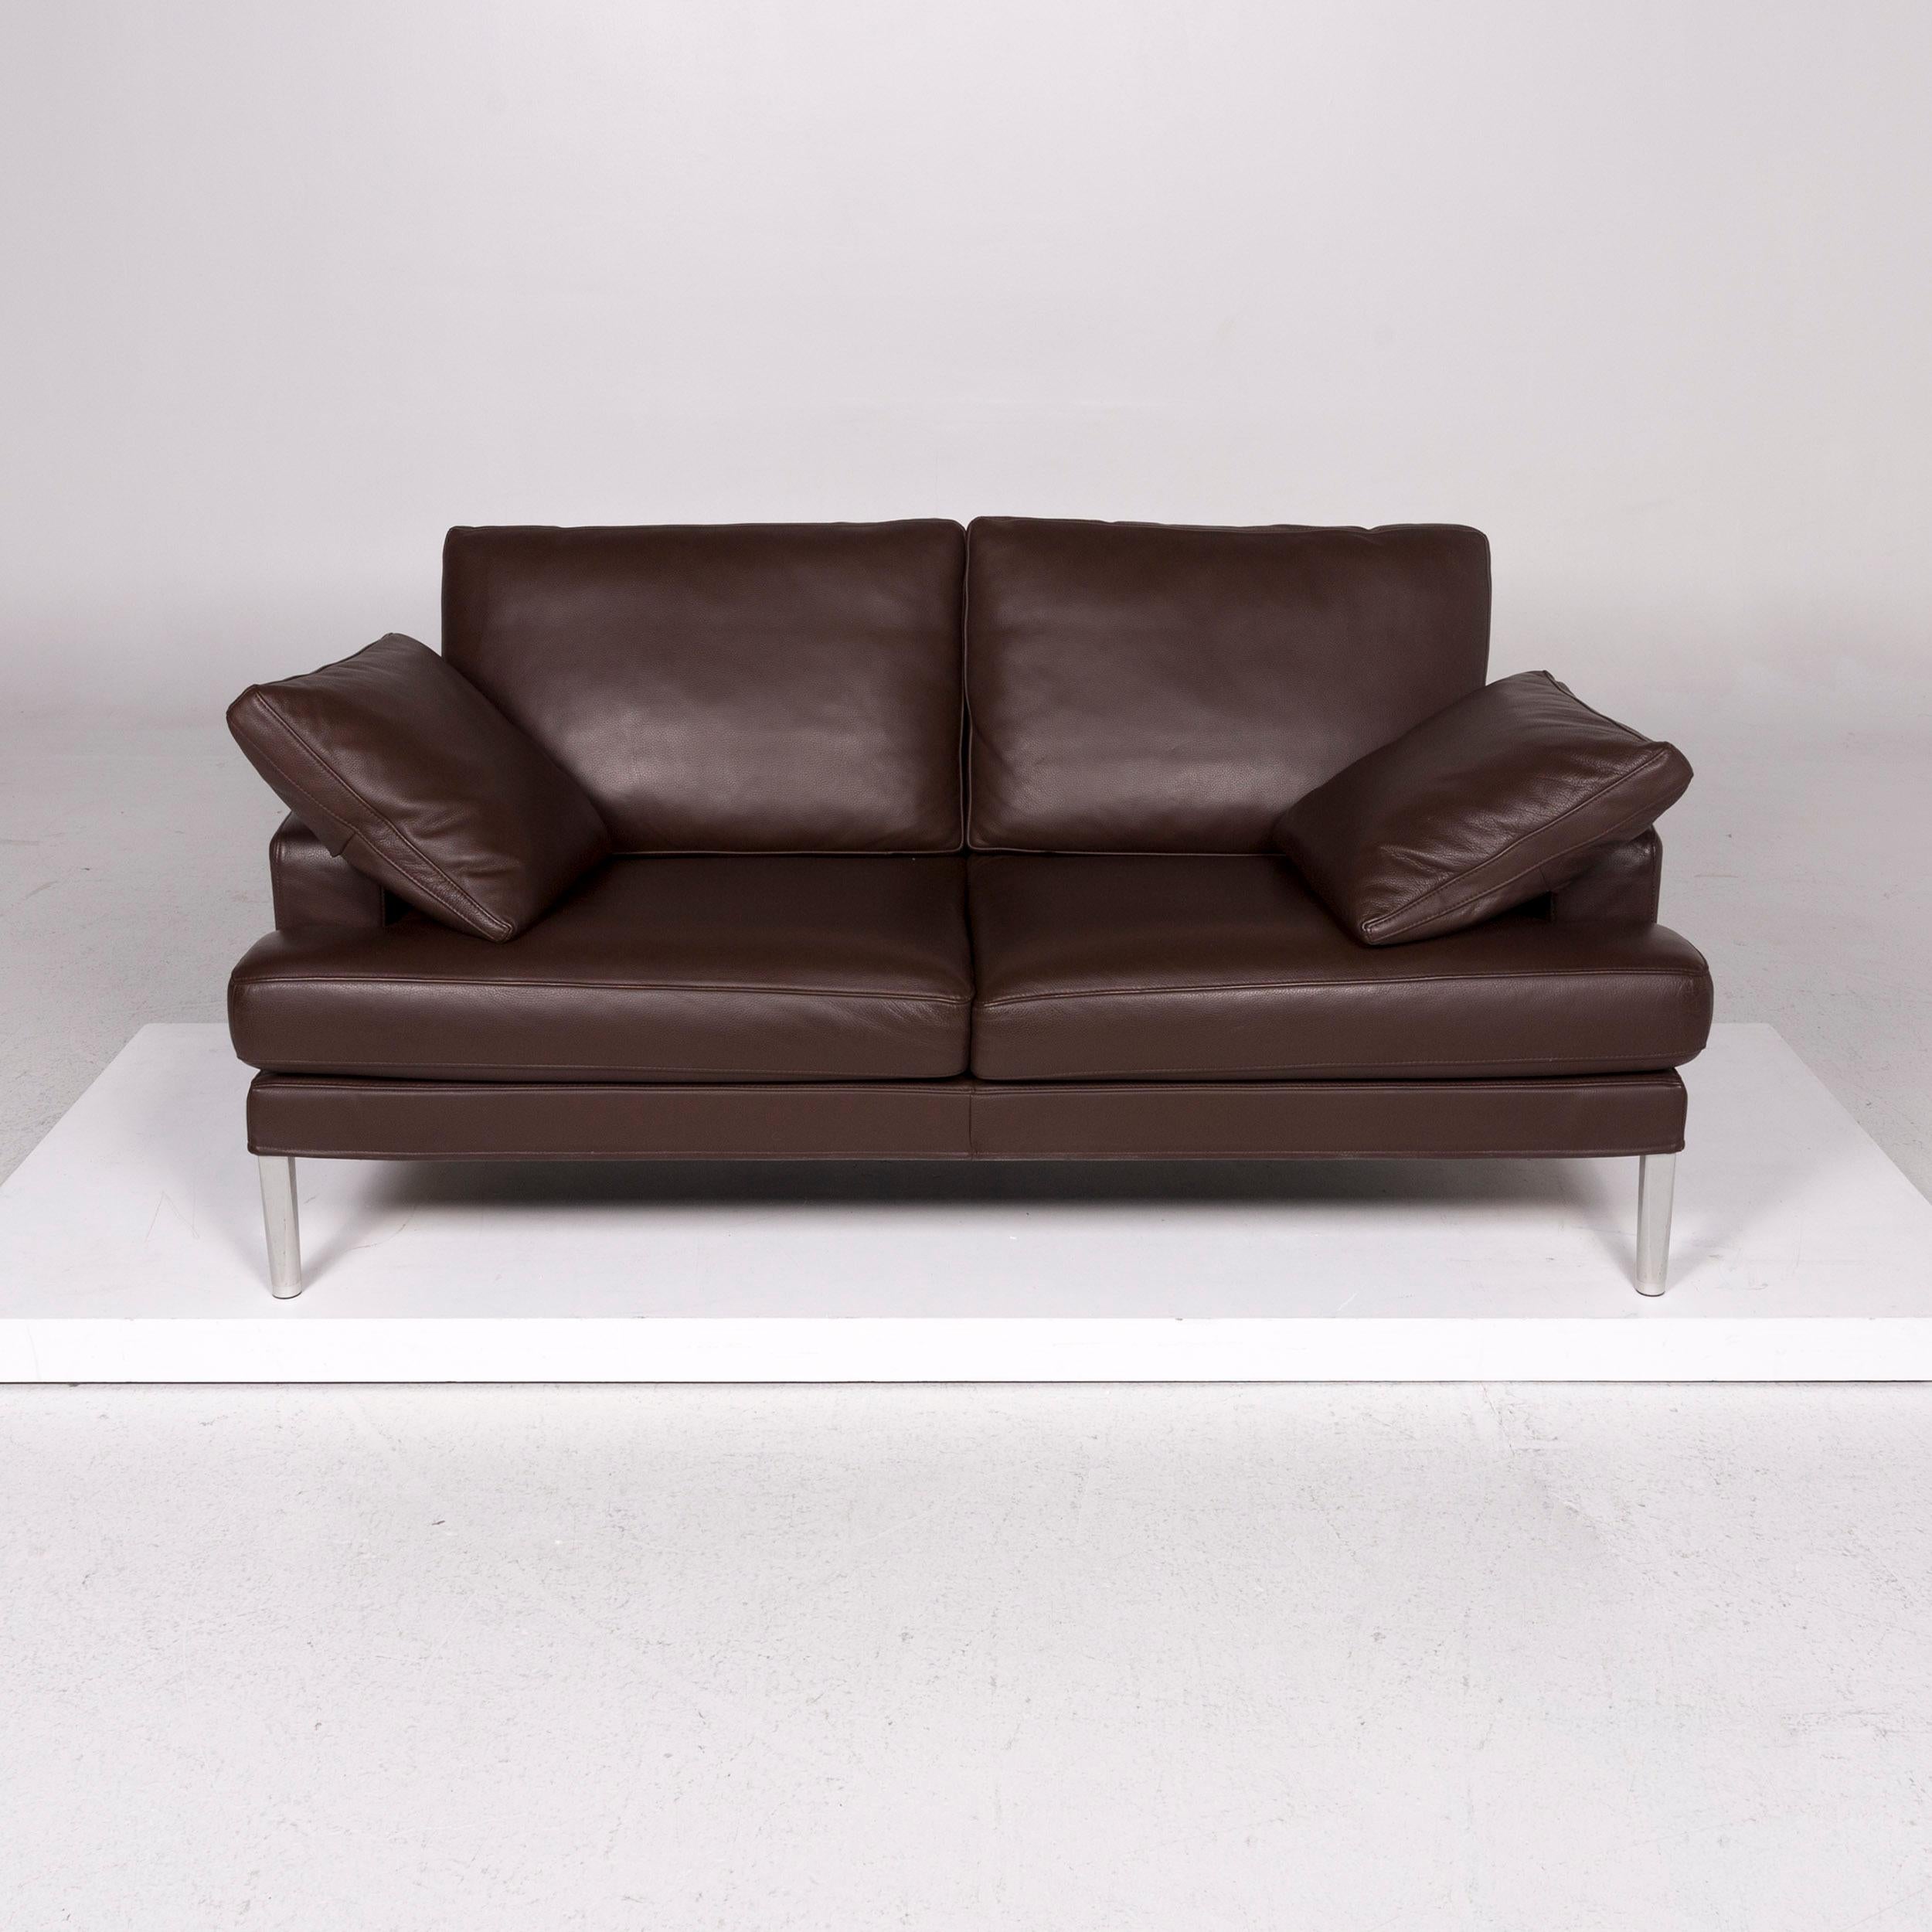 FSM Clarus Leather Sofa Set Brown Dark Brown 1 Three-Seat 1 Two-Seat For Sale 12